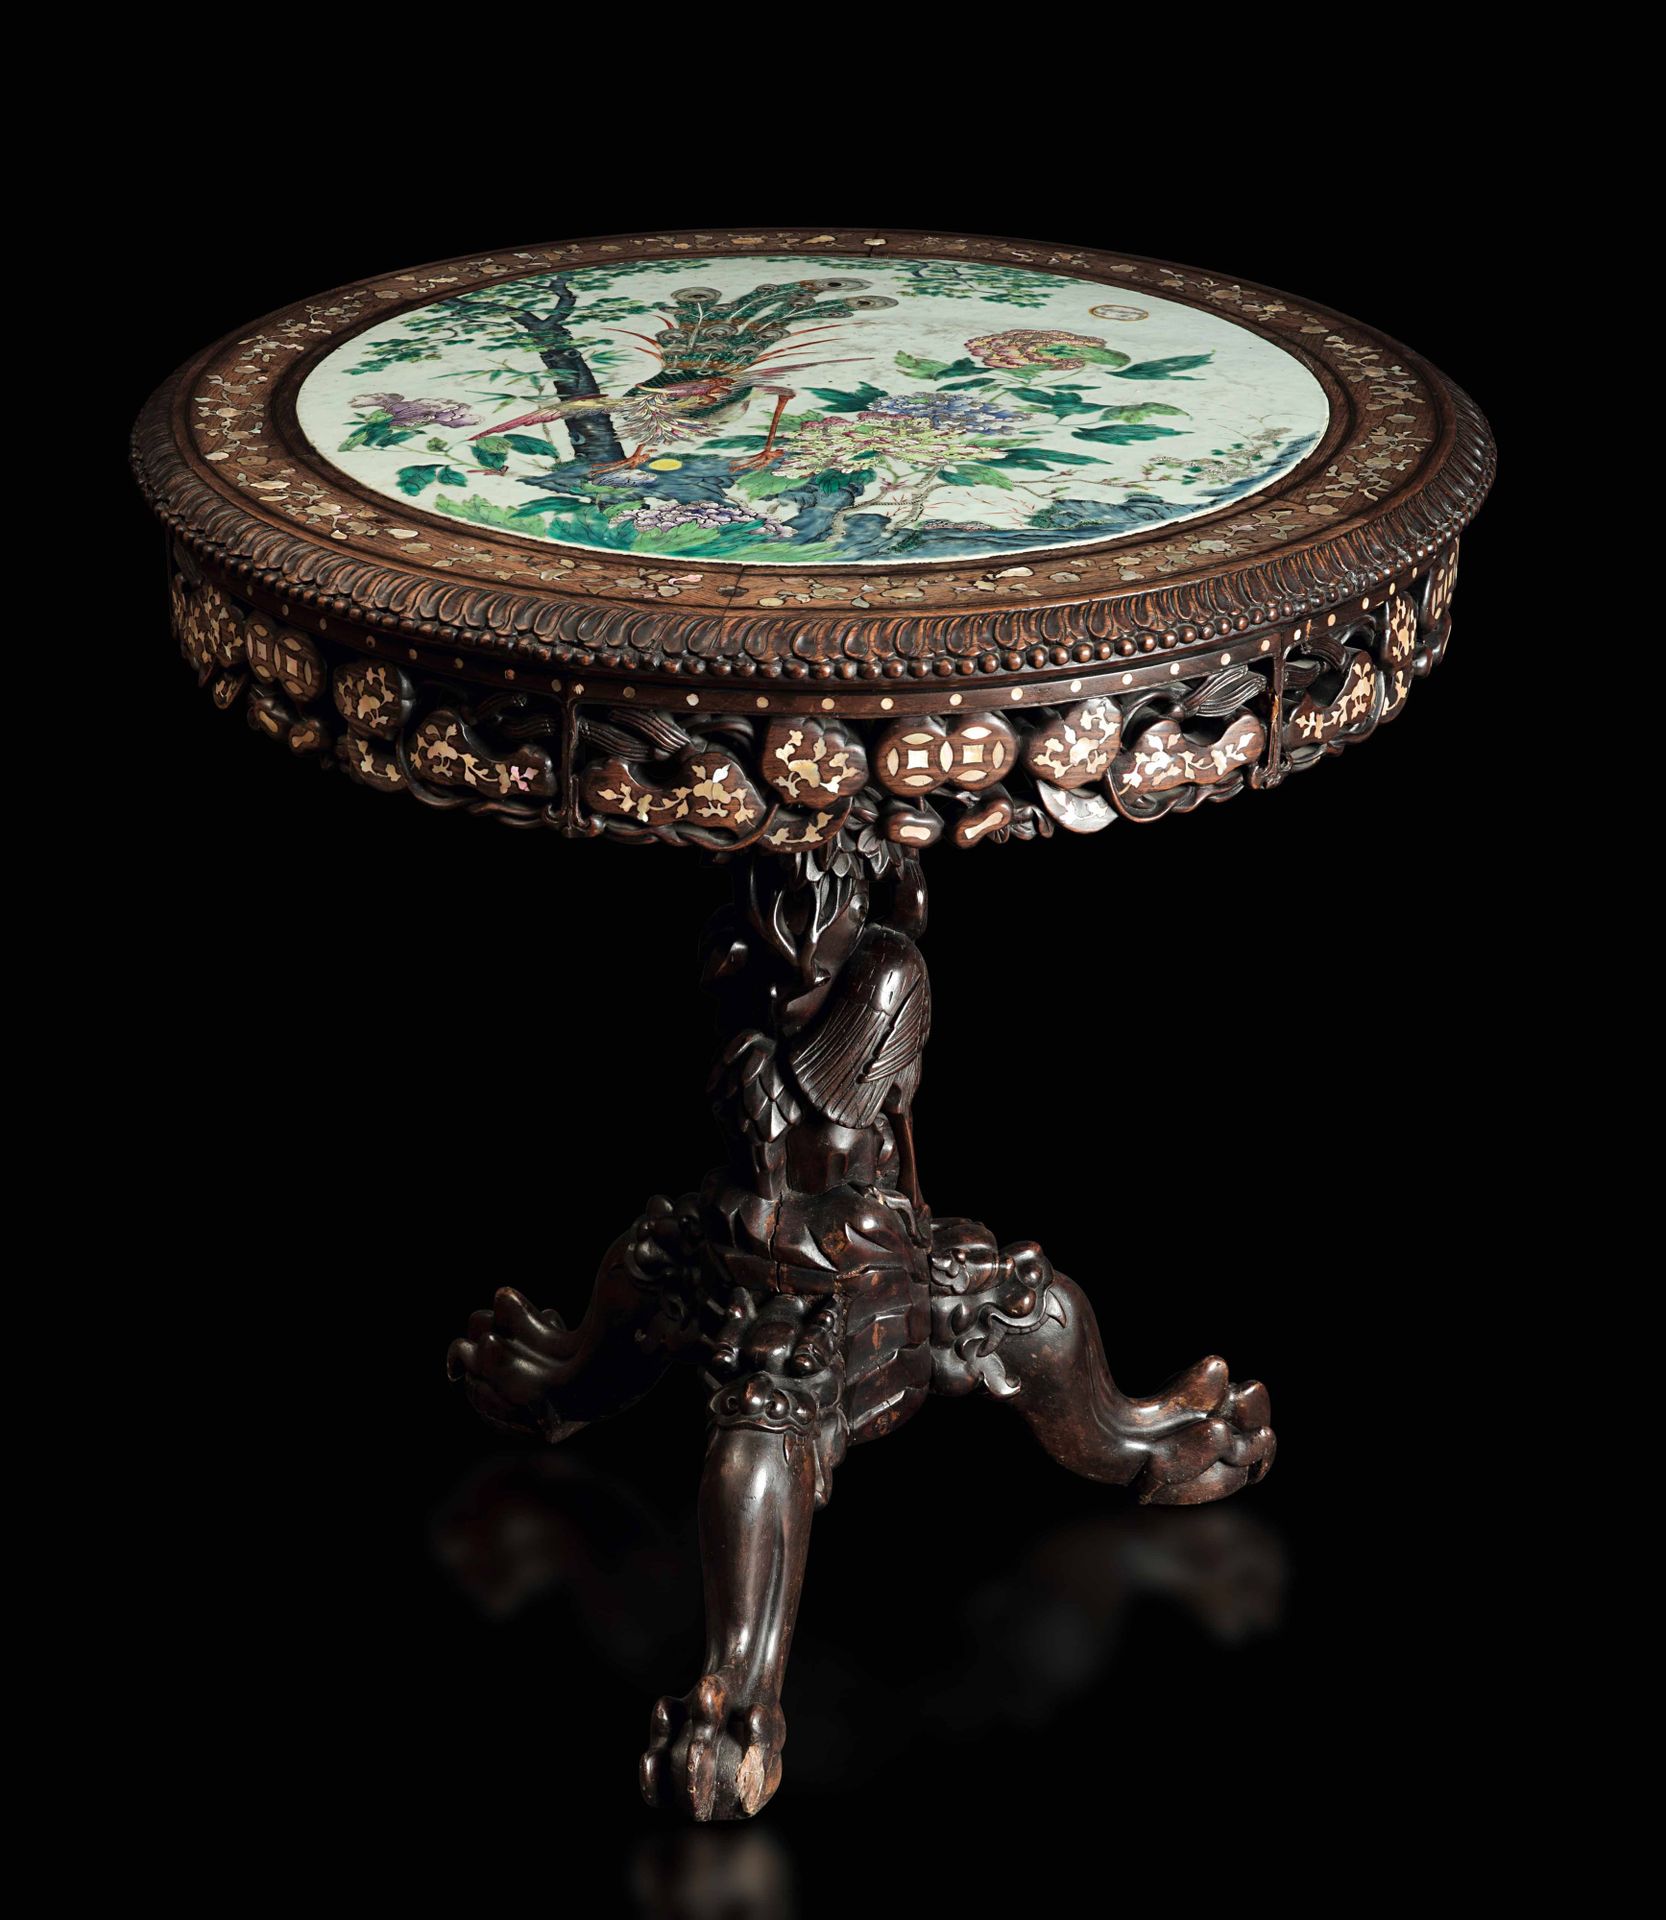 A round table, China, Qing Dynasty, 1800s Wood with mother-of-pearl inlays and a&hellip;